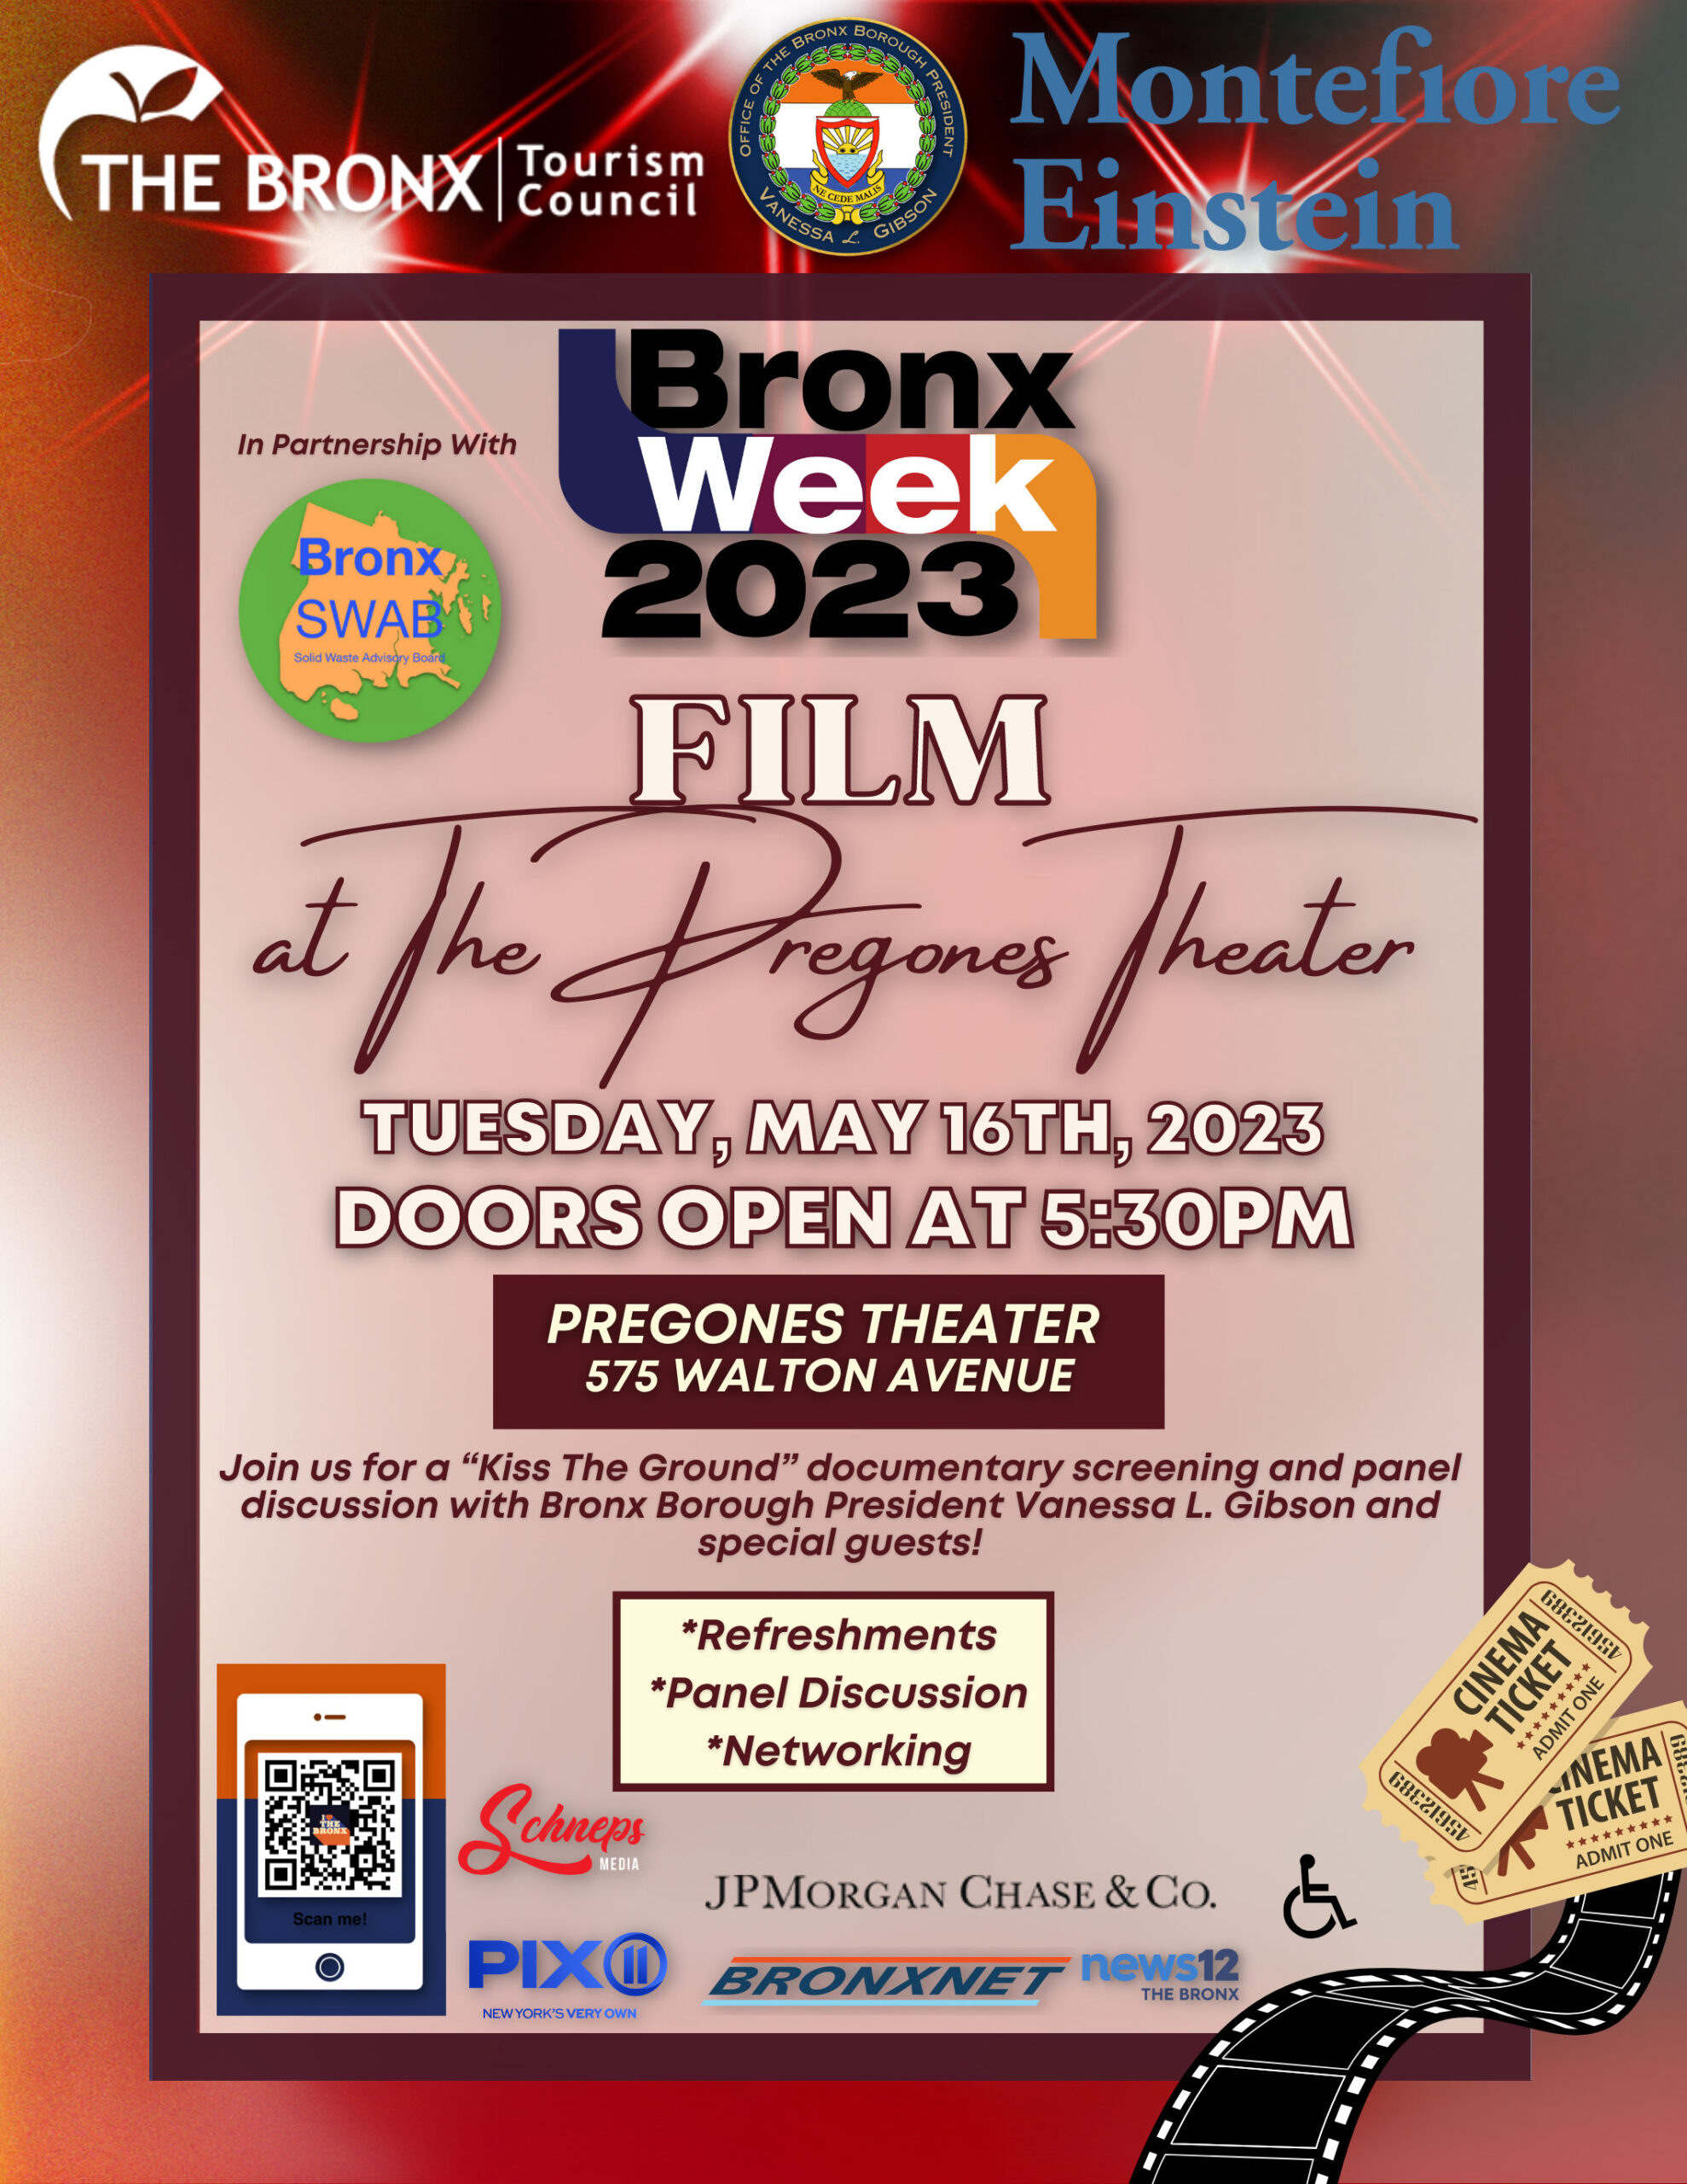 Bronx Week Film and Panel event flyer for May 15, 2023